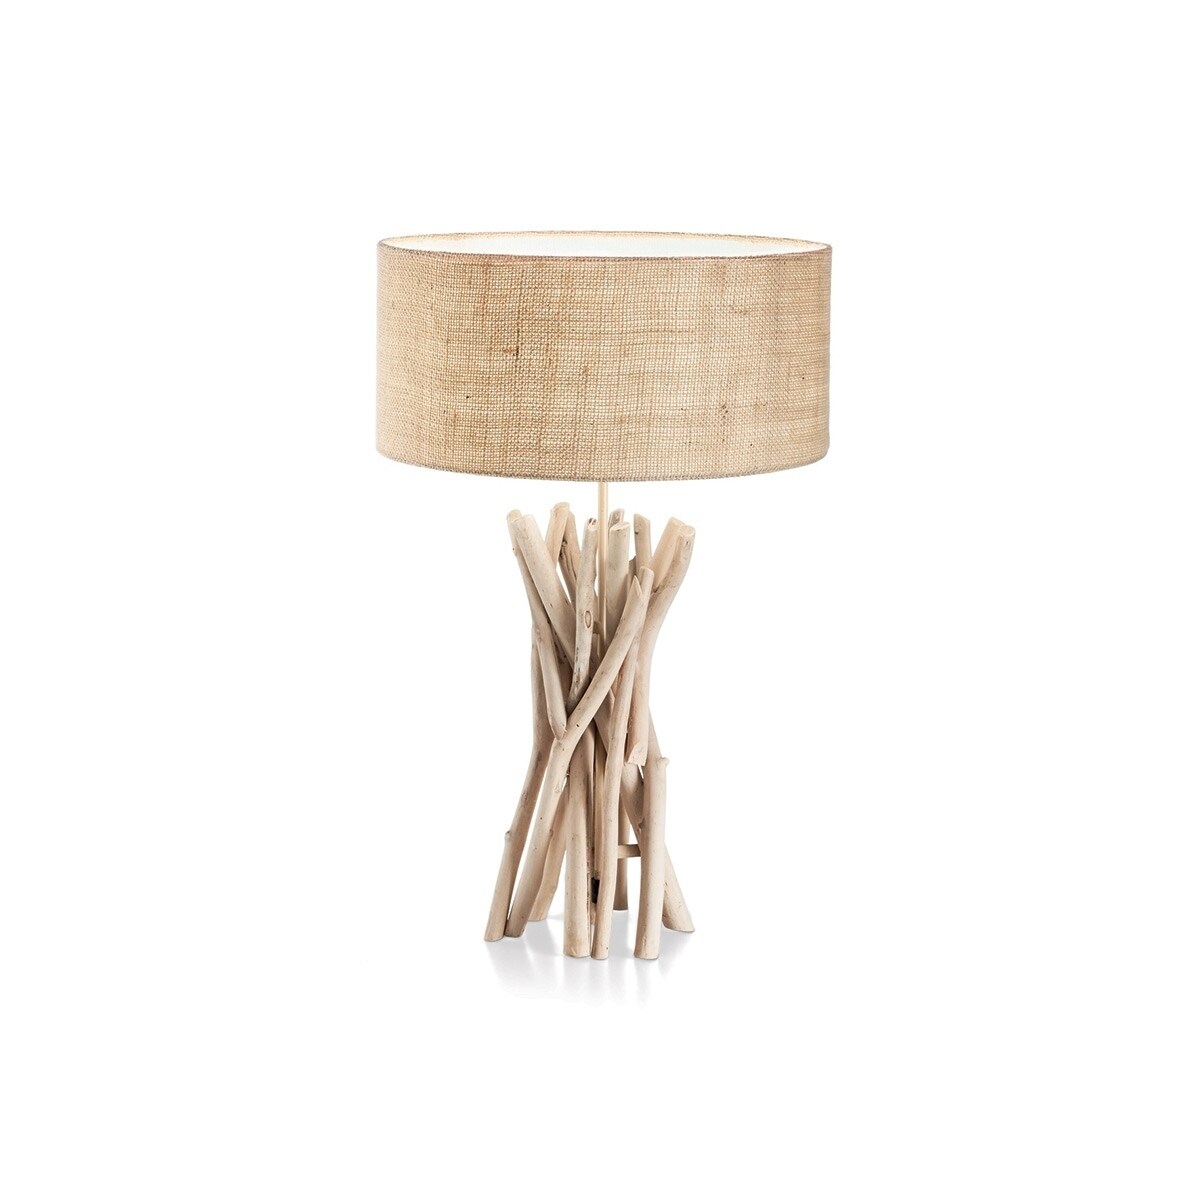 driftwood table lamp